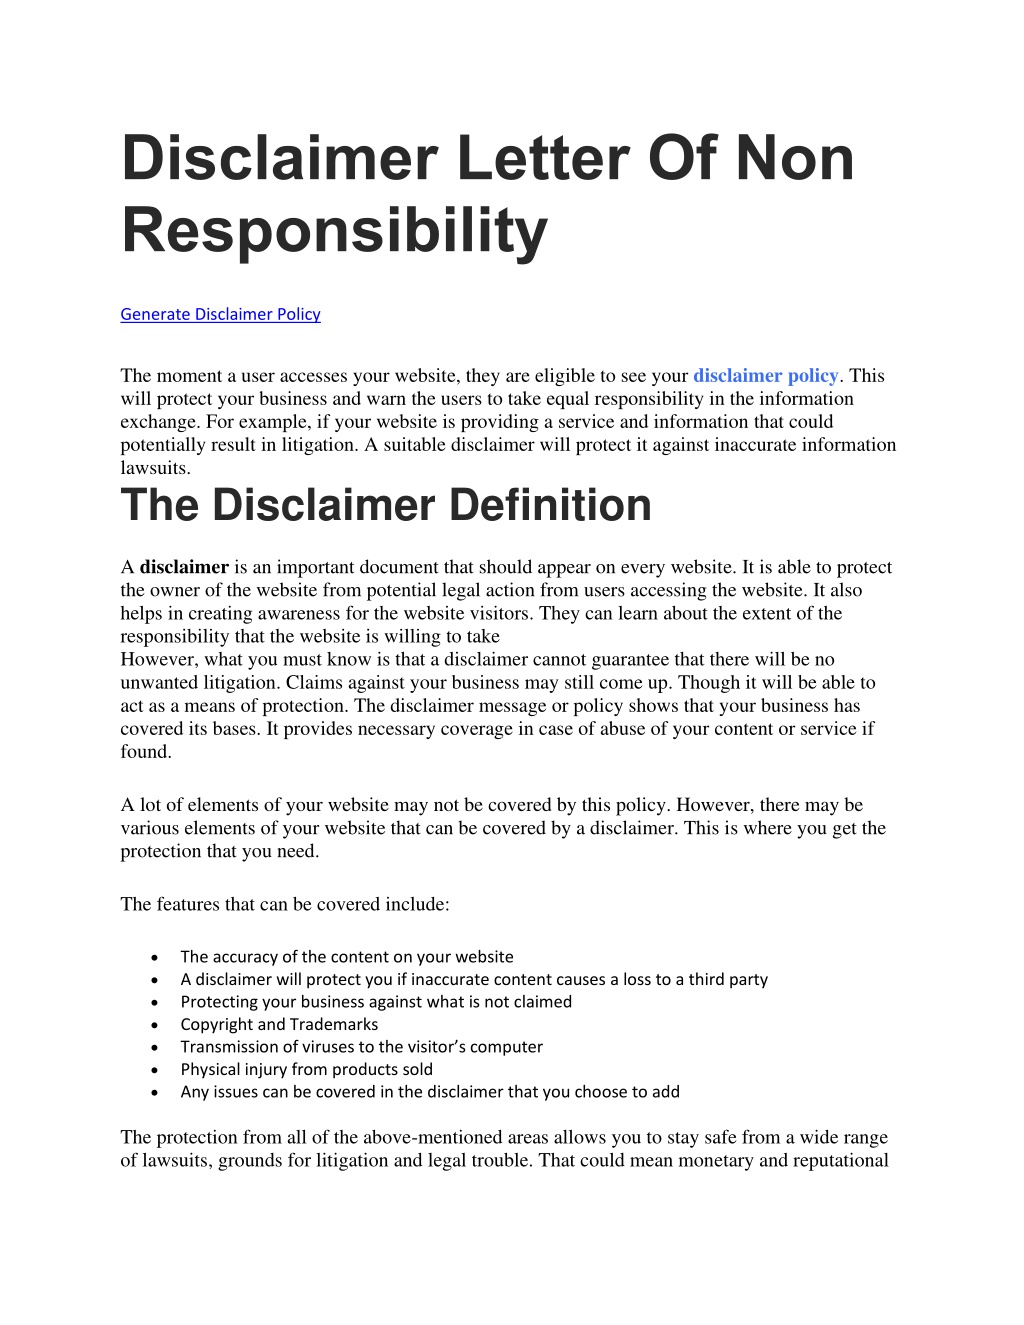 Disclaimer Letter Of Non Responsibility